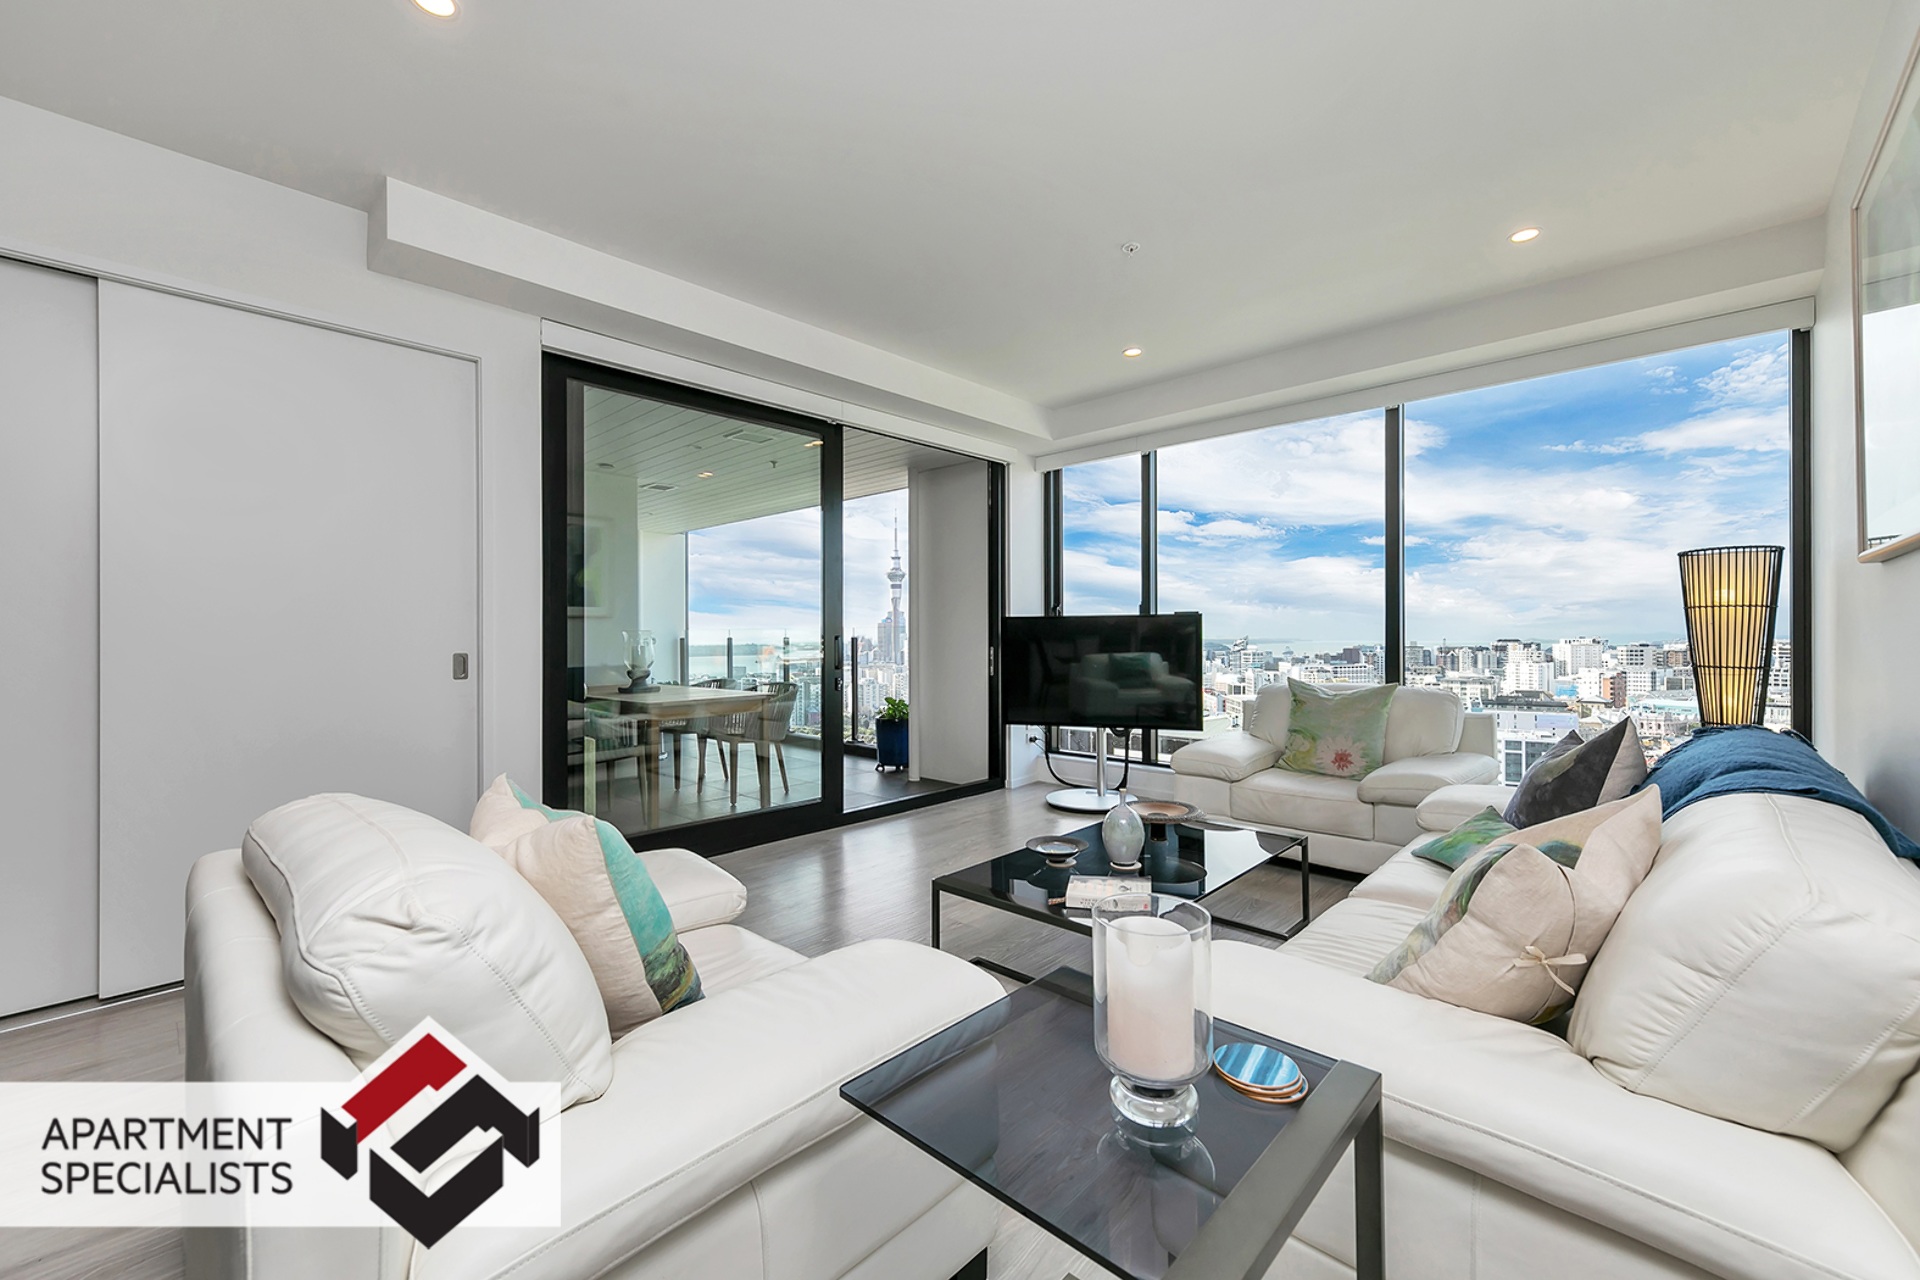 12 | 8 Hereford Street, Freemans Bay | Apartment Specialists